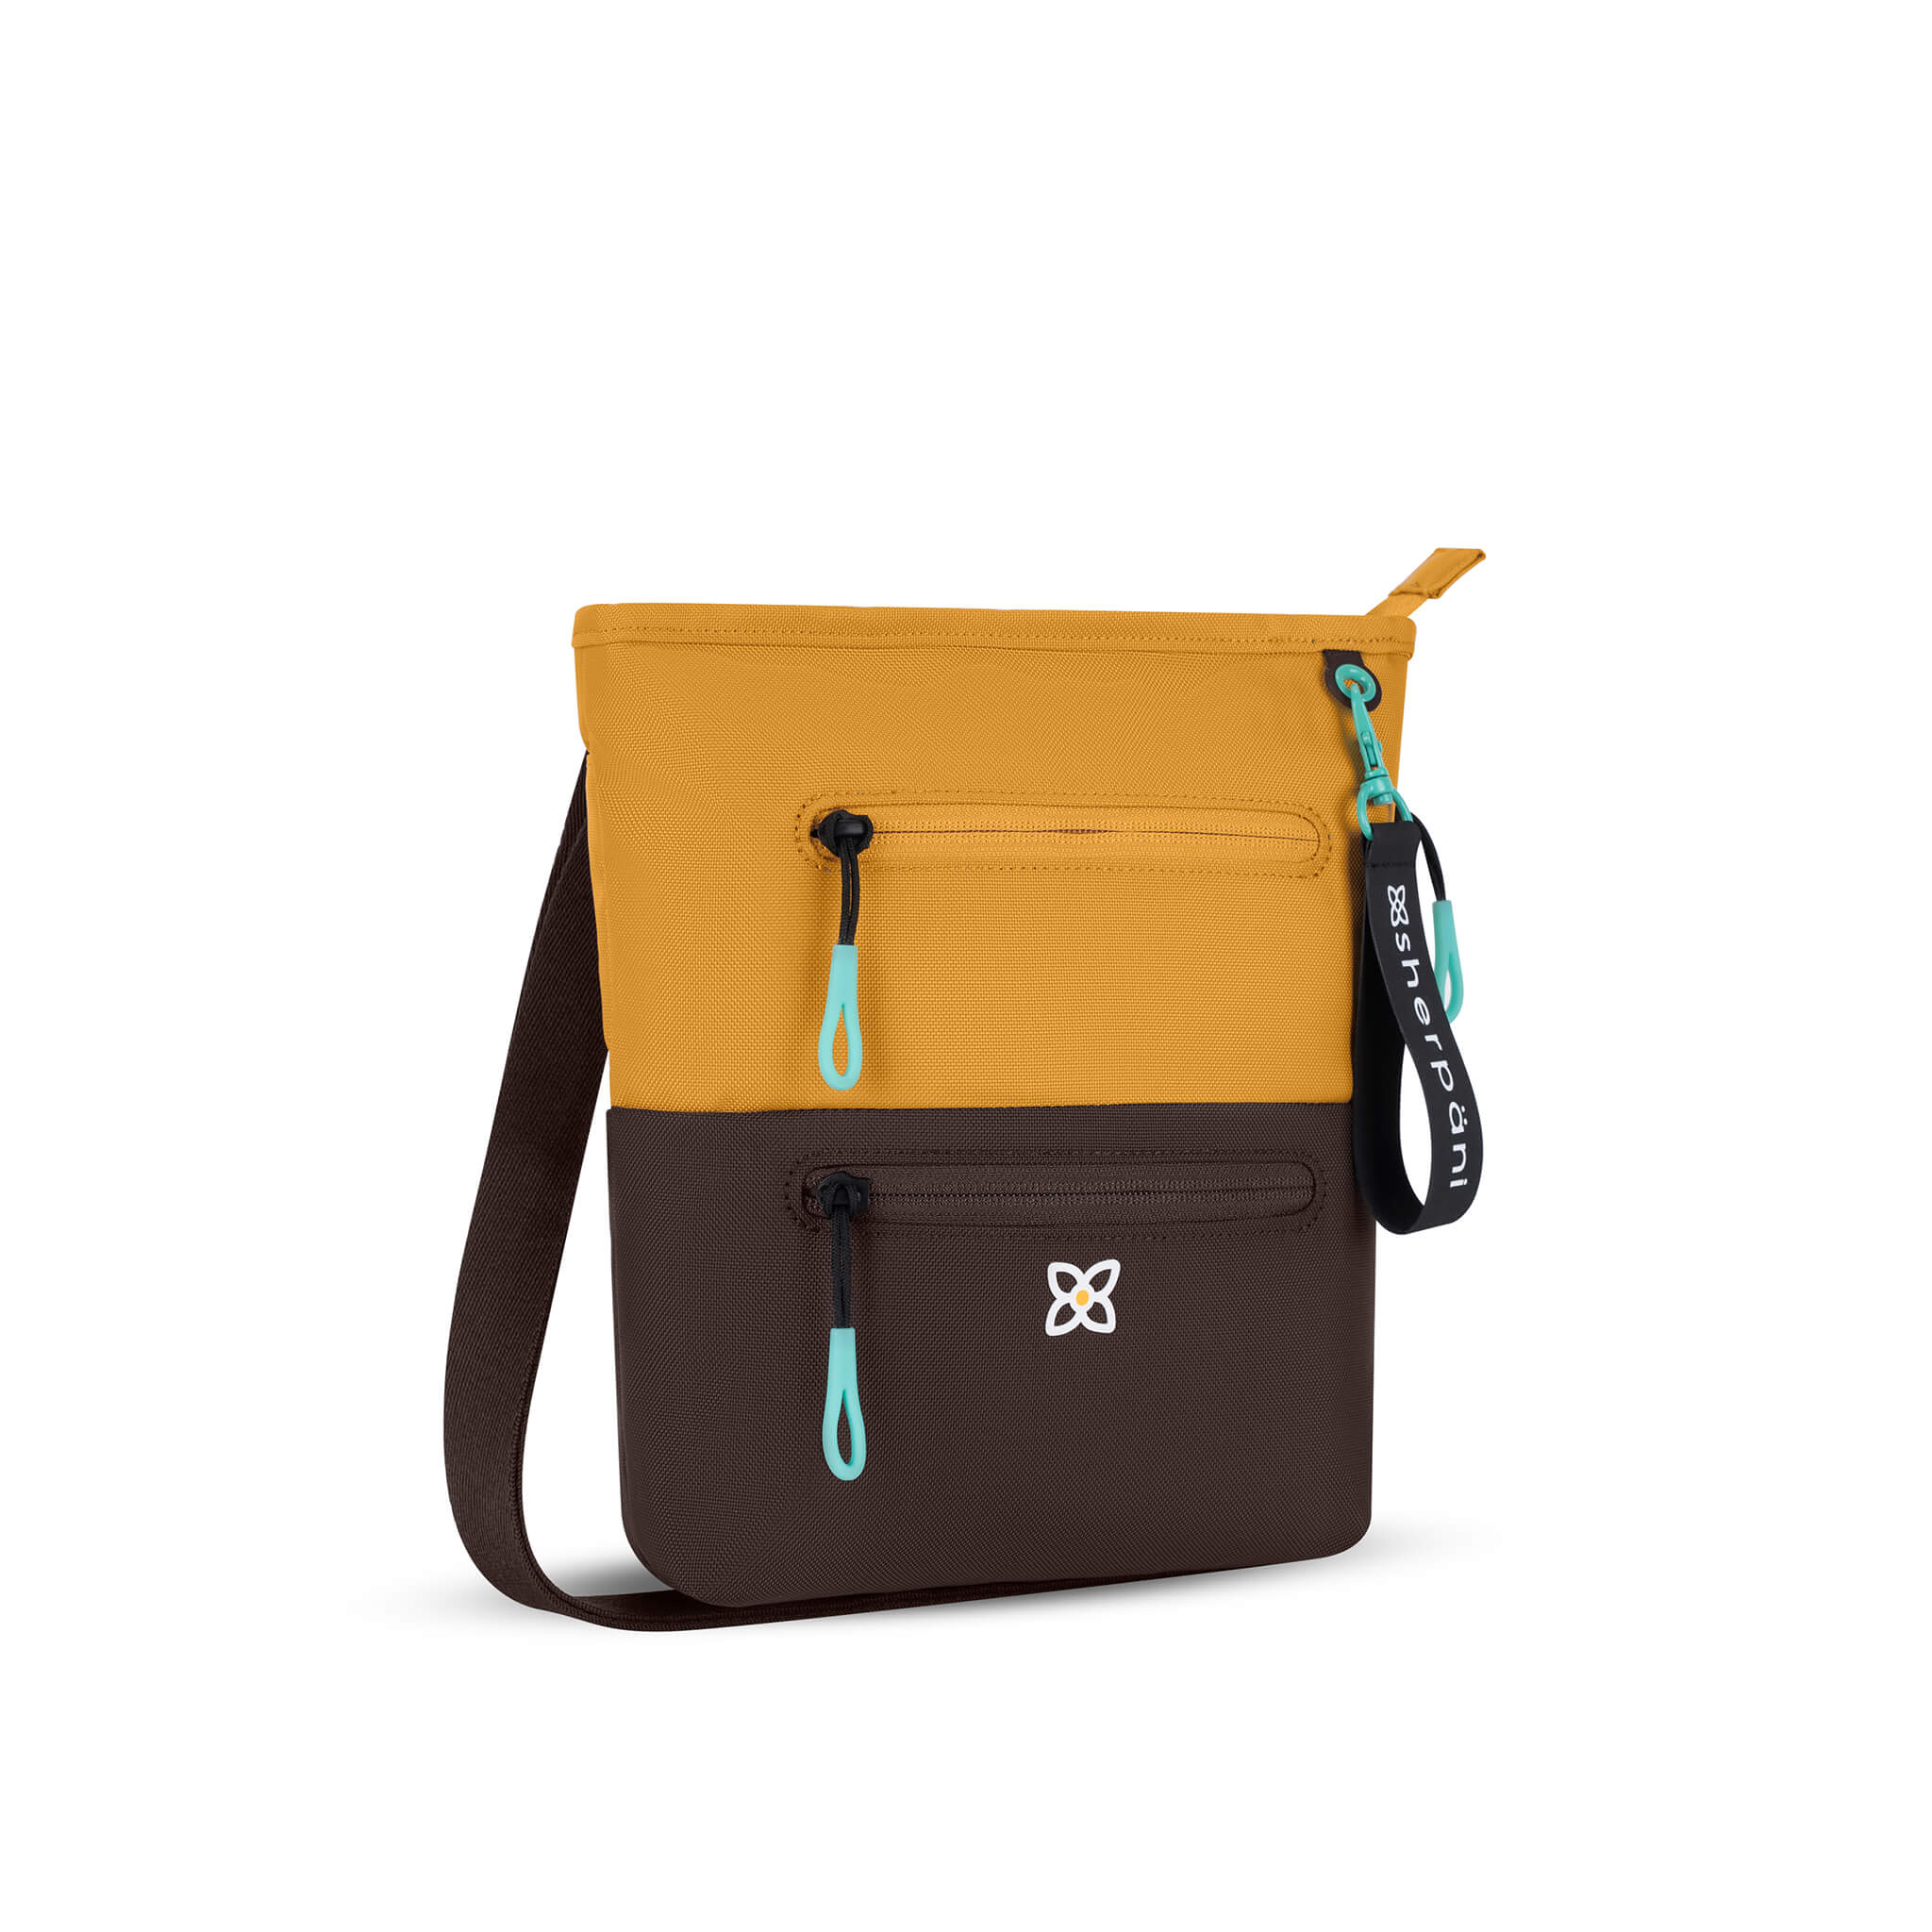 Angled front view of Sherpani crossbody travel bag, the Sadie in Sundial. Sadie features include two front zipper pockets, a discrete side pocket, detachable keychain, adjustable crossbody strap, back slip pocket and RFID blocking technology. The Sundial color is two-toned in yellow and dark brown with turquoise accents.